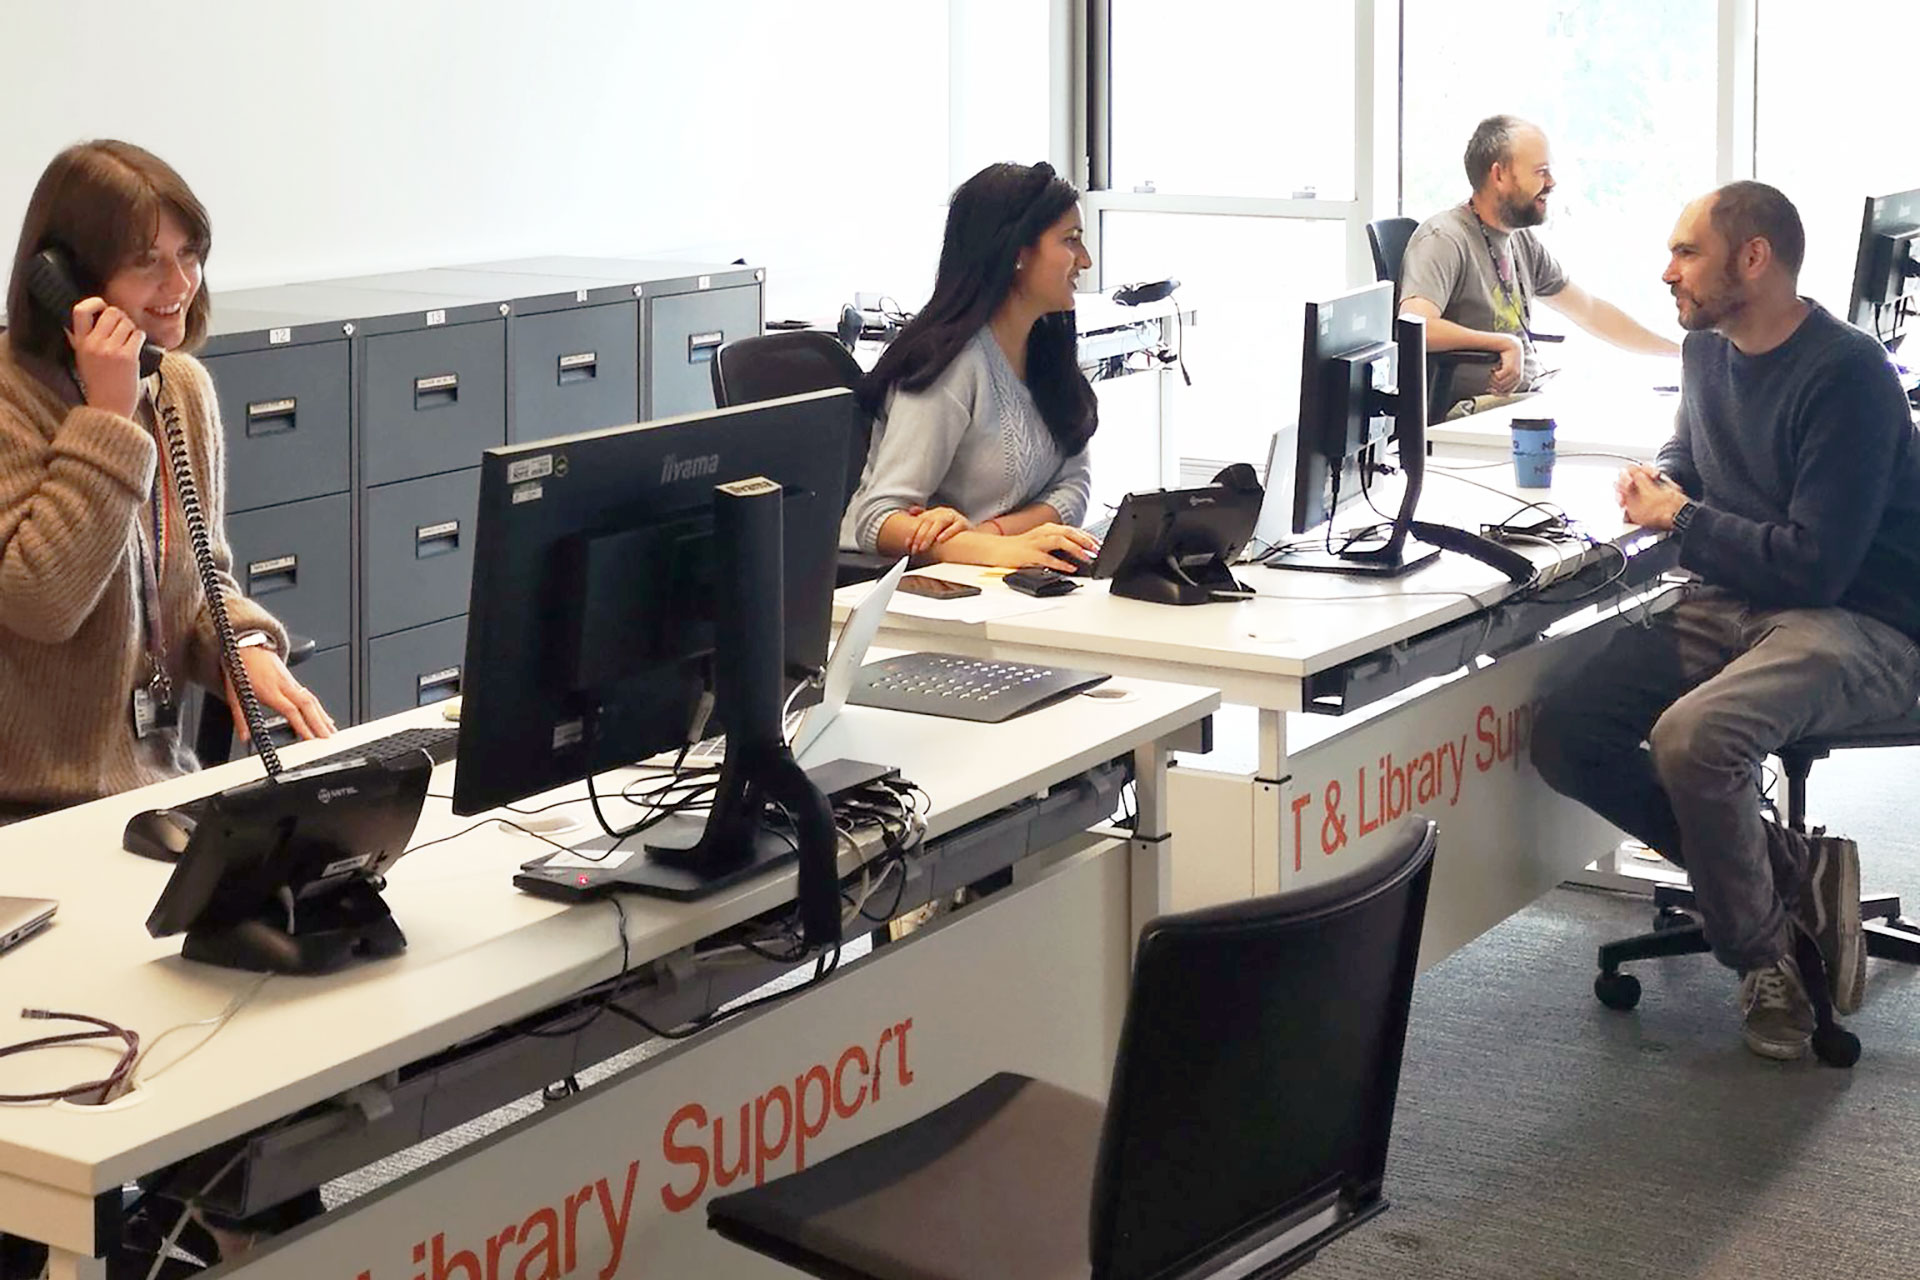 IT and Library support desk